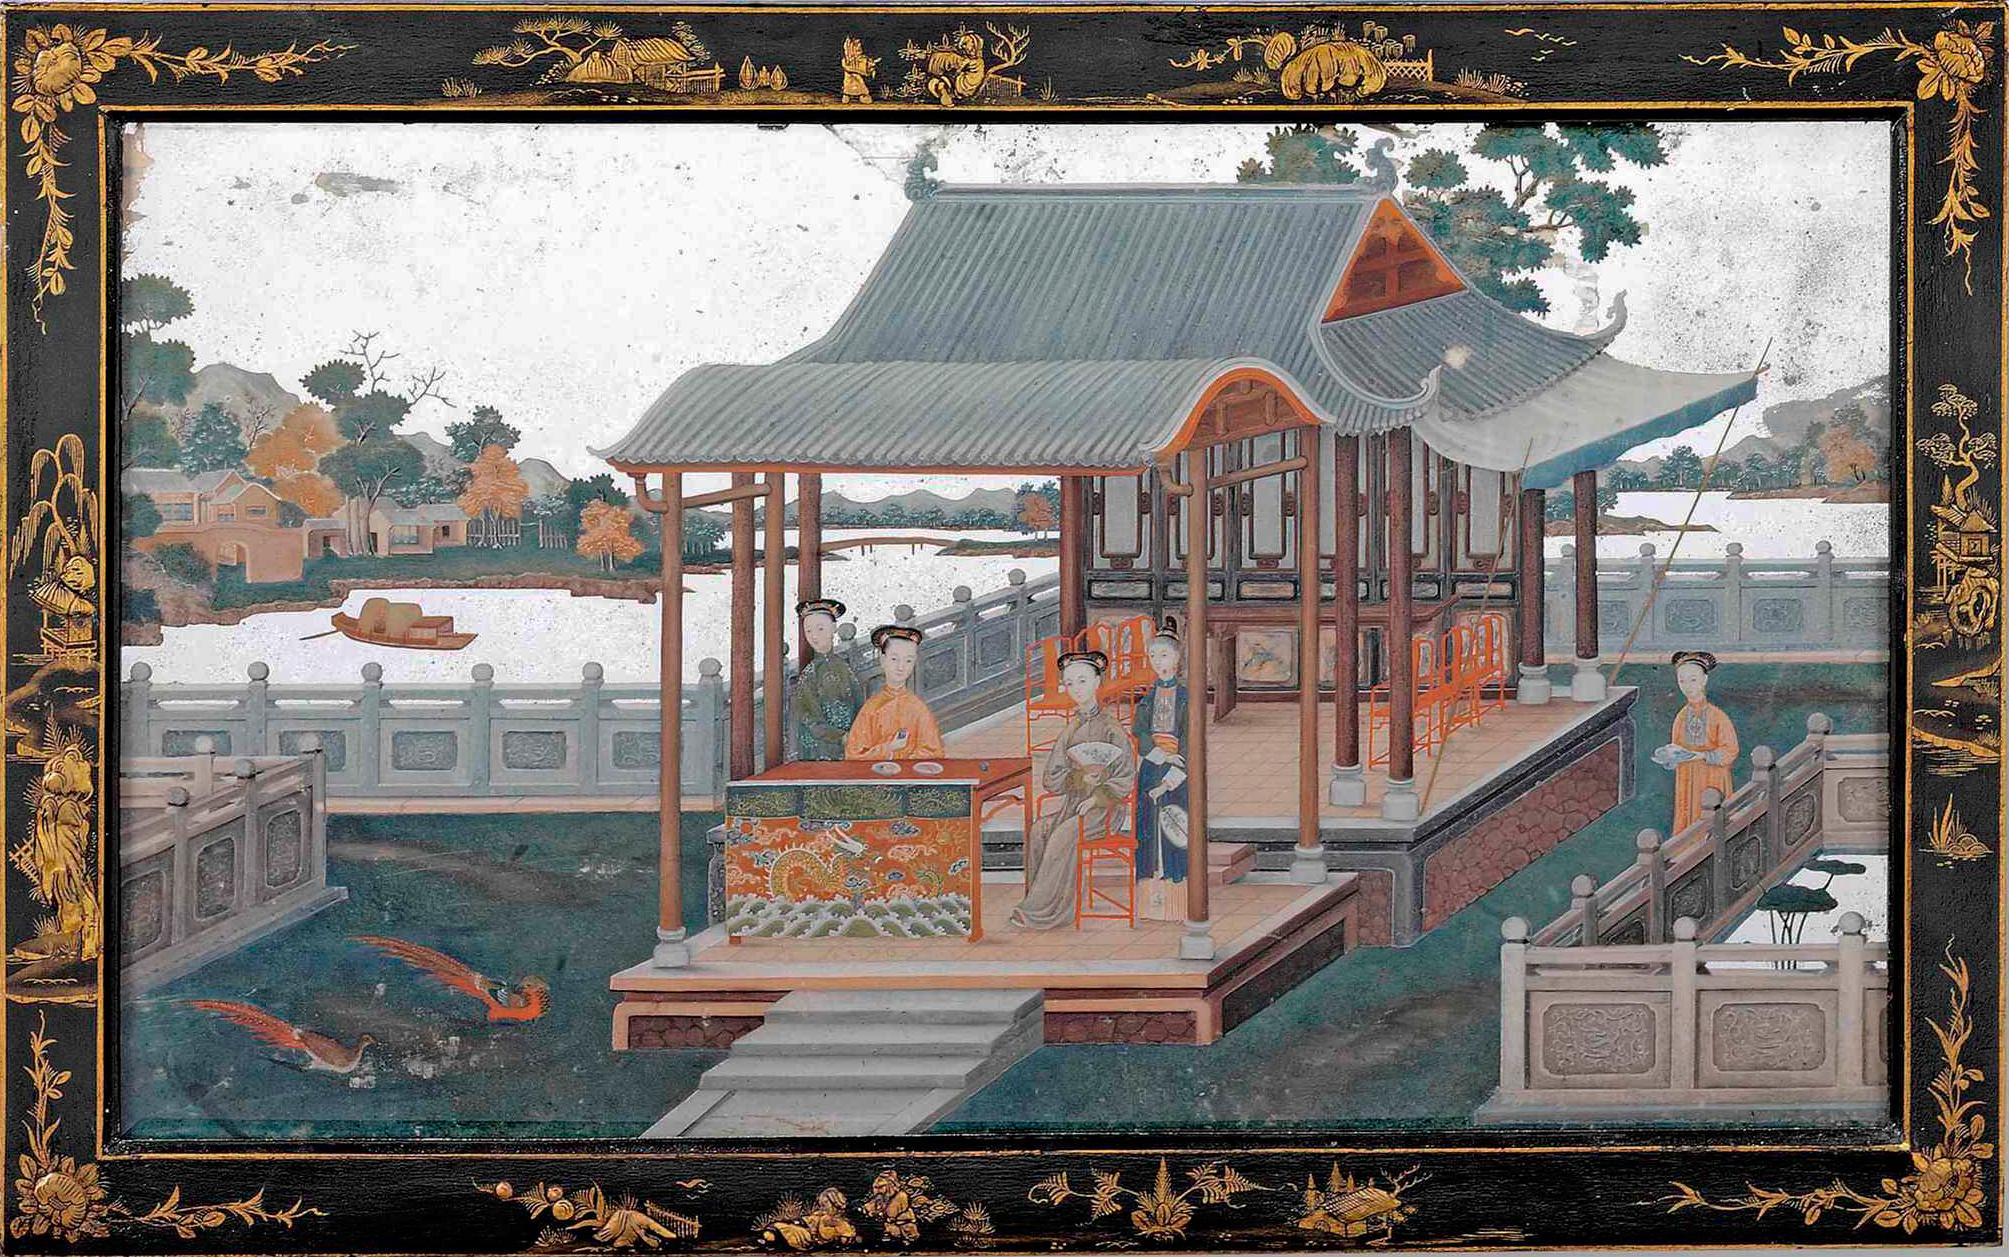 A fine quality and rare mid-18th century export beveled mirror painting, depicting ladies taking tea in a pagoda, the background with a river, buildings and mountainous landscape, set in its original black and gilt japanned frame.


English,